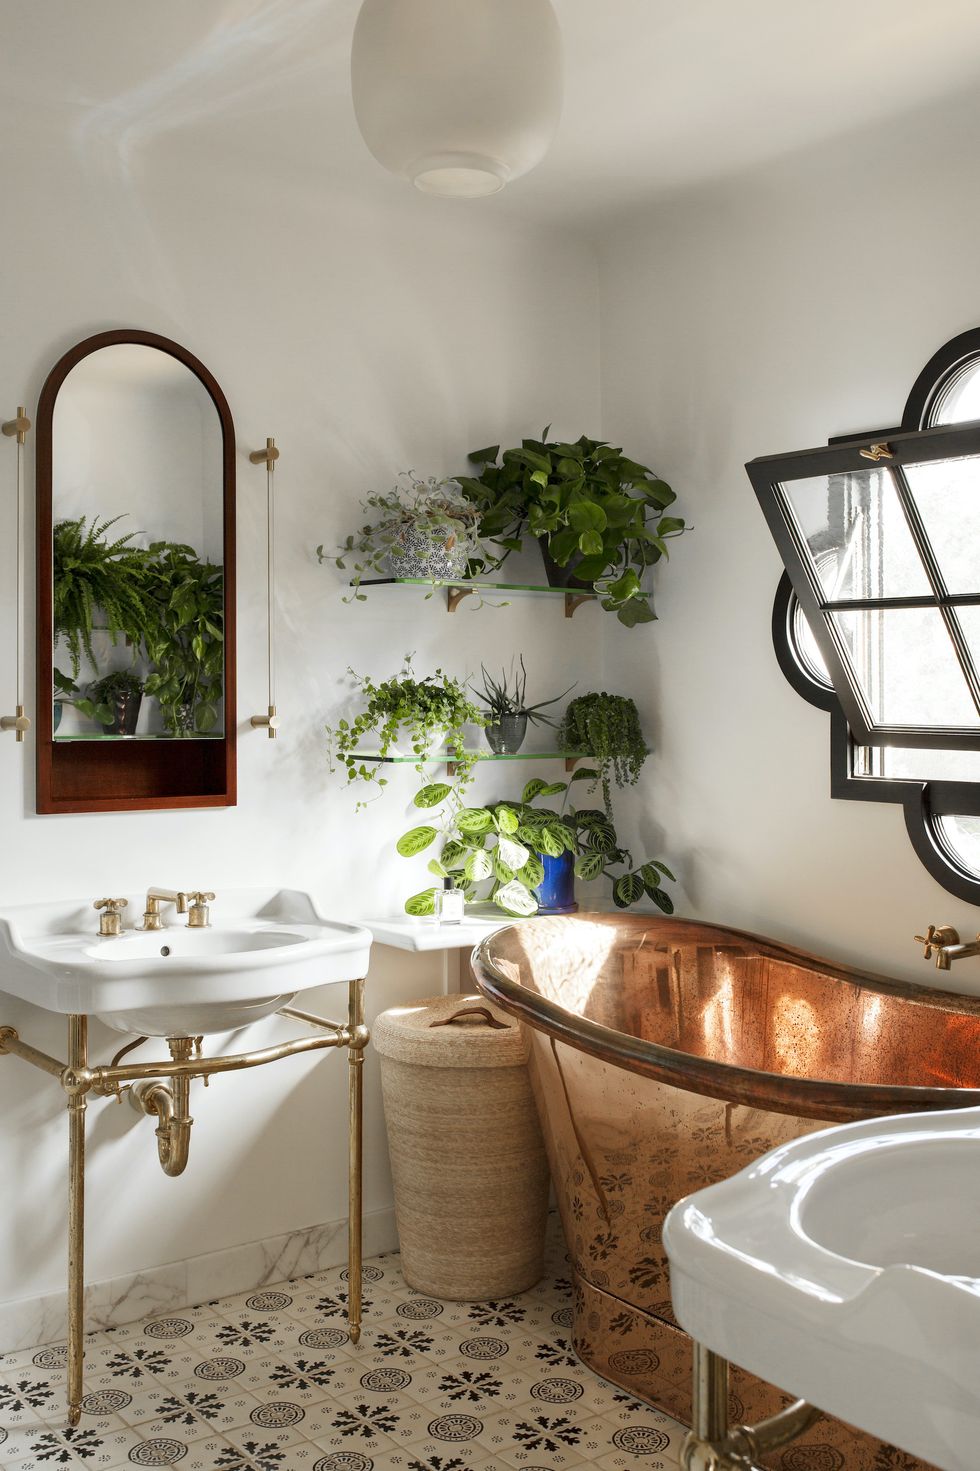 26 Stylish Walk-In Shower Ideas for Small Bathrooms